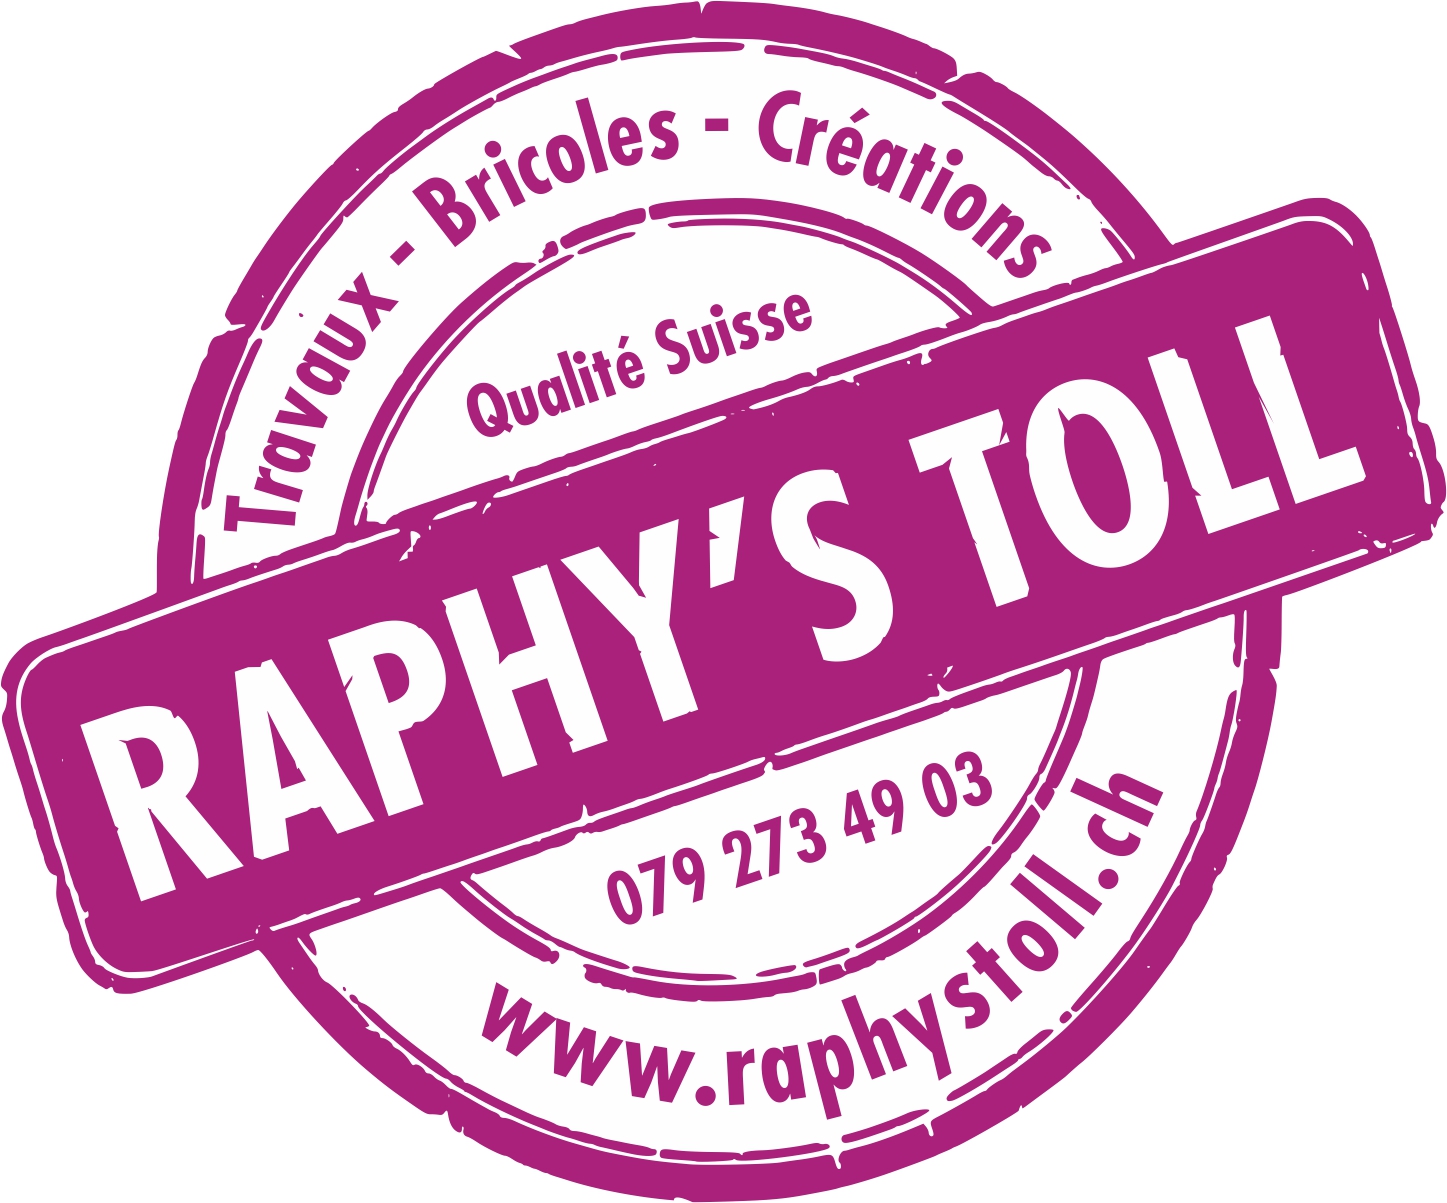 Raphy's toll